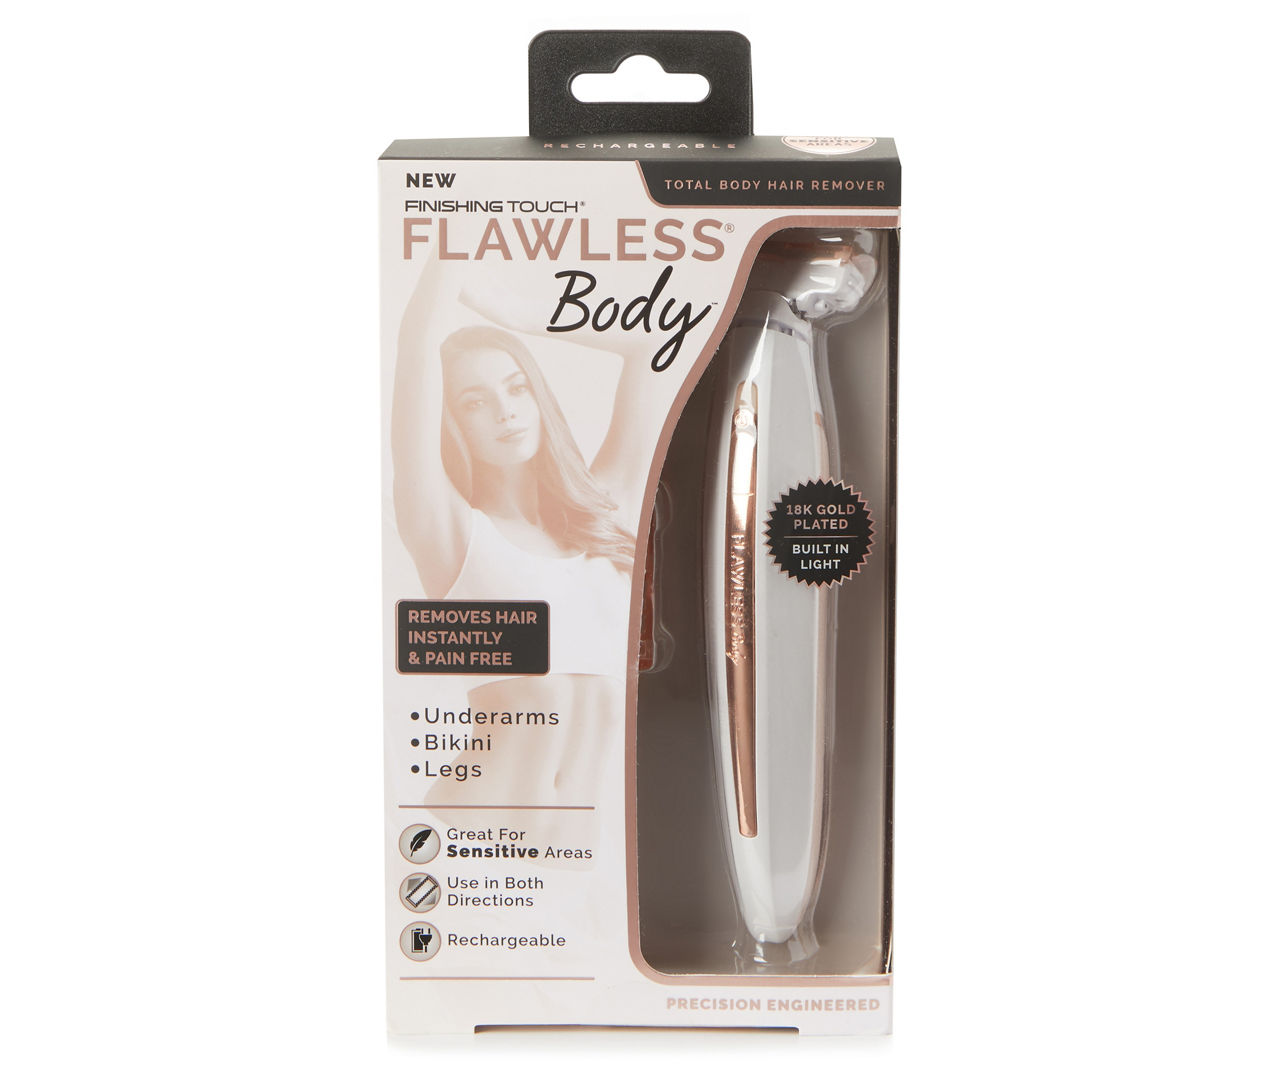 As Seen On TV Finishing Touch Flawless Body Total Body Hair Remover